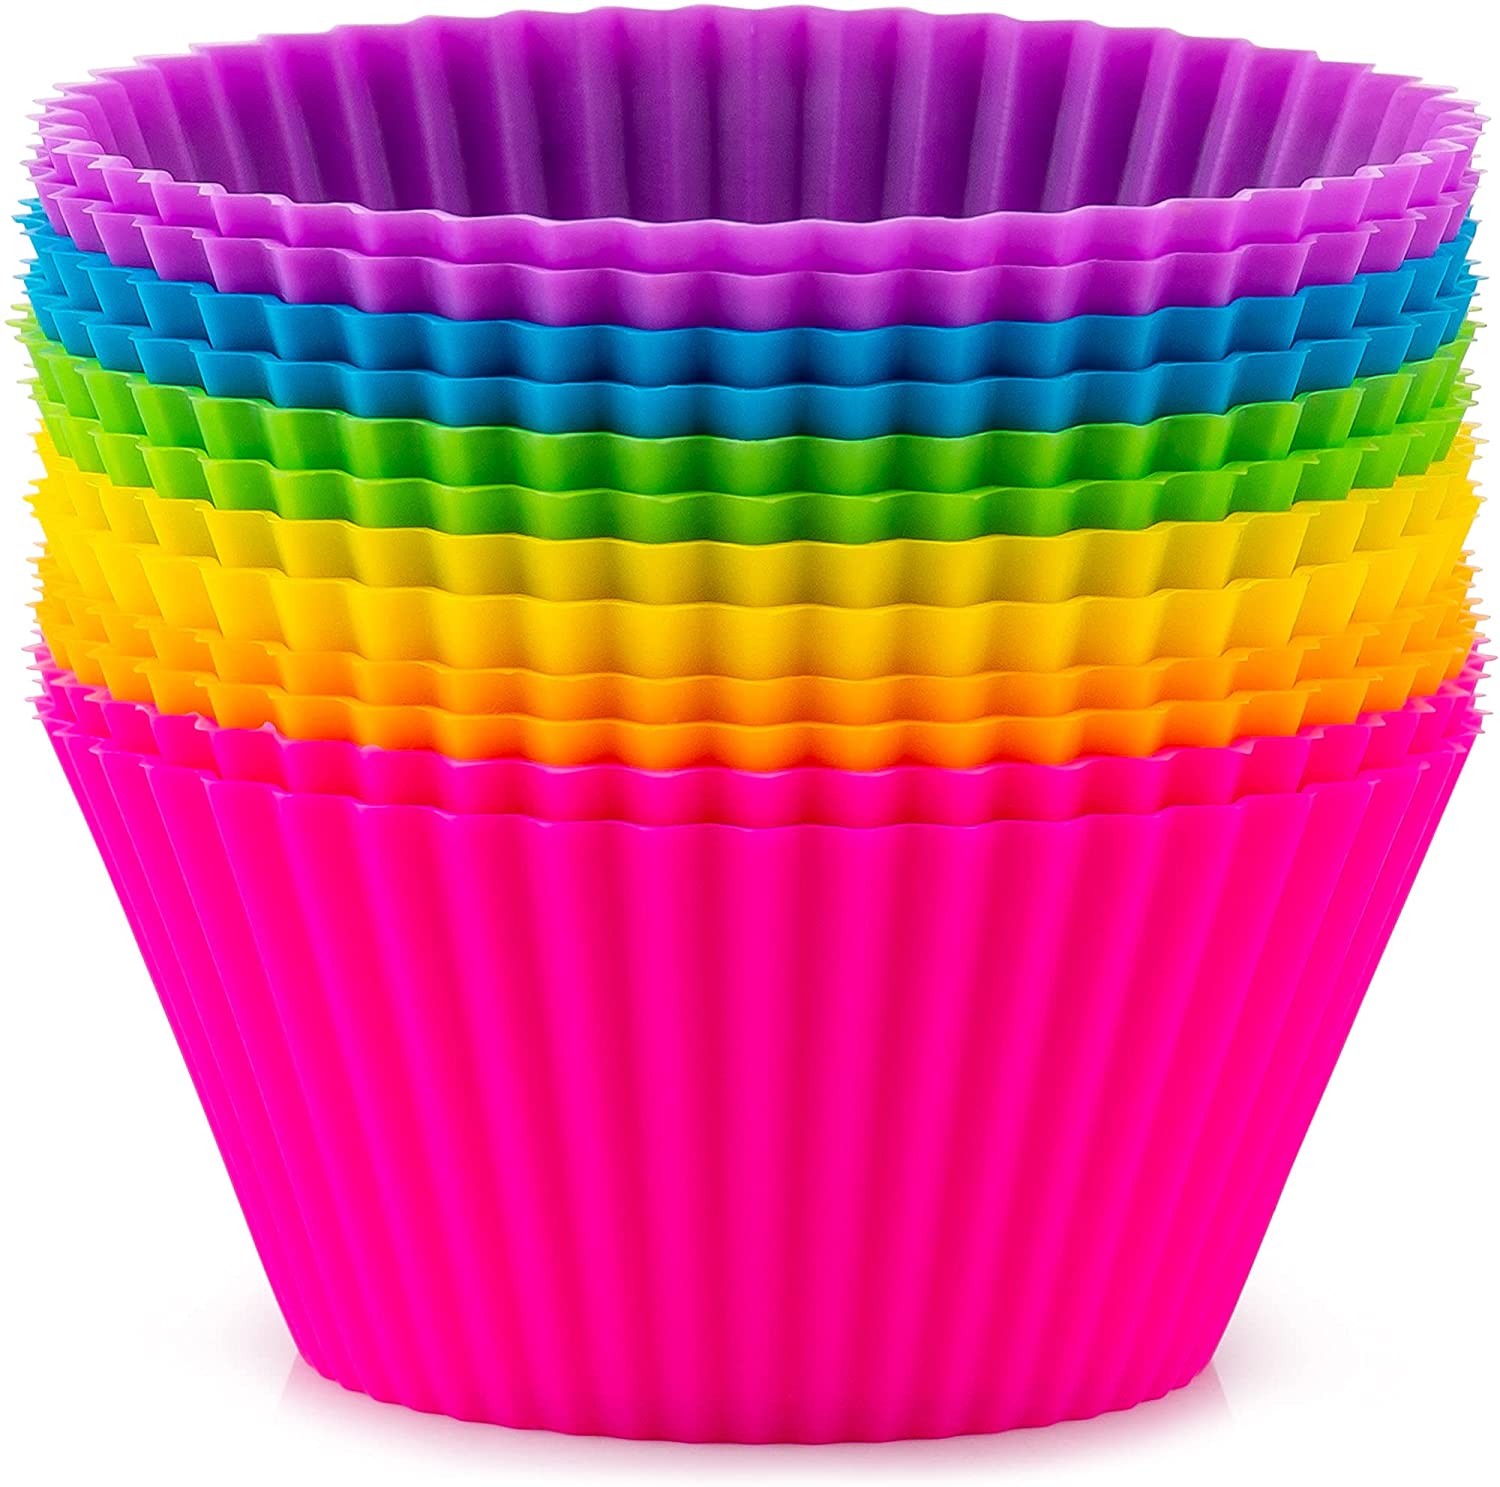 

Silicone Baking Cups Tools, Reusable Cupcake Liners Nonstick Muffin Cup Cake Molds Set Standard Size Cupcakes Holder